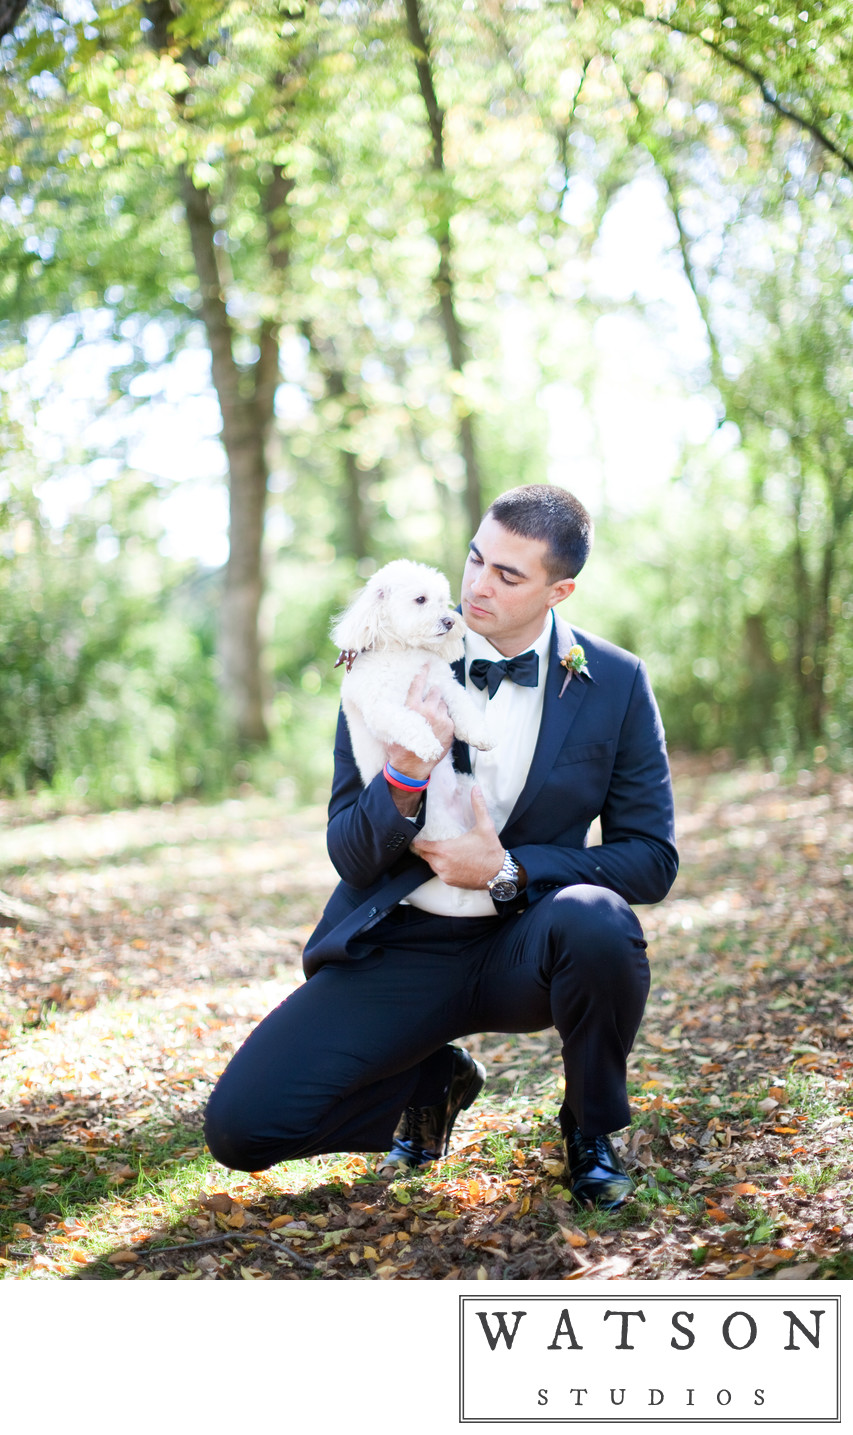 Weddings with Dogs Included in the Ceremonies